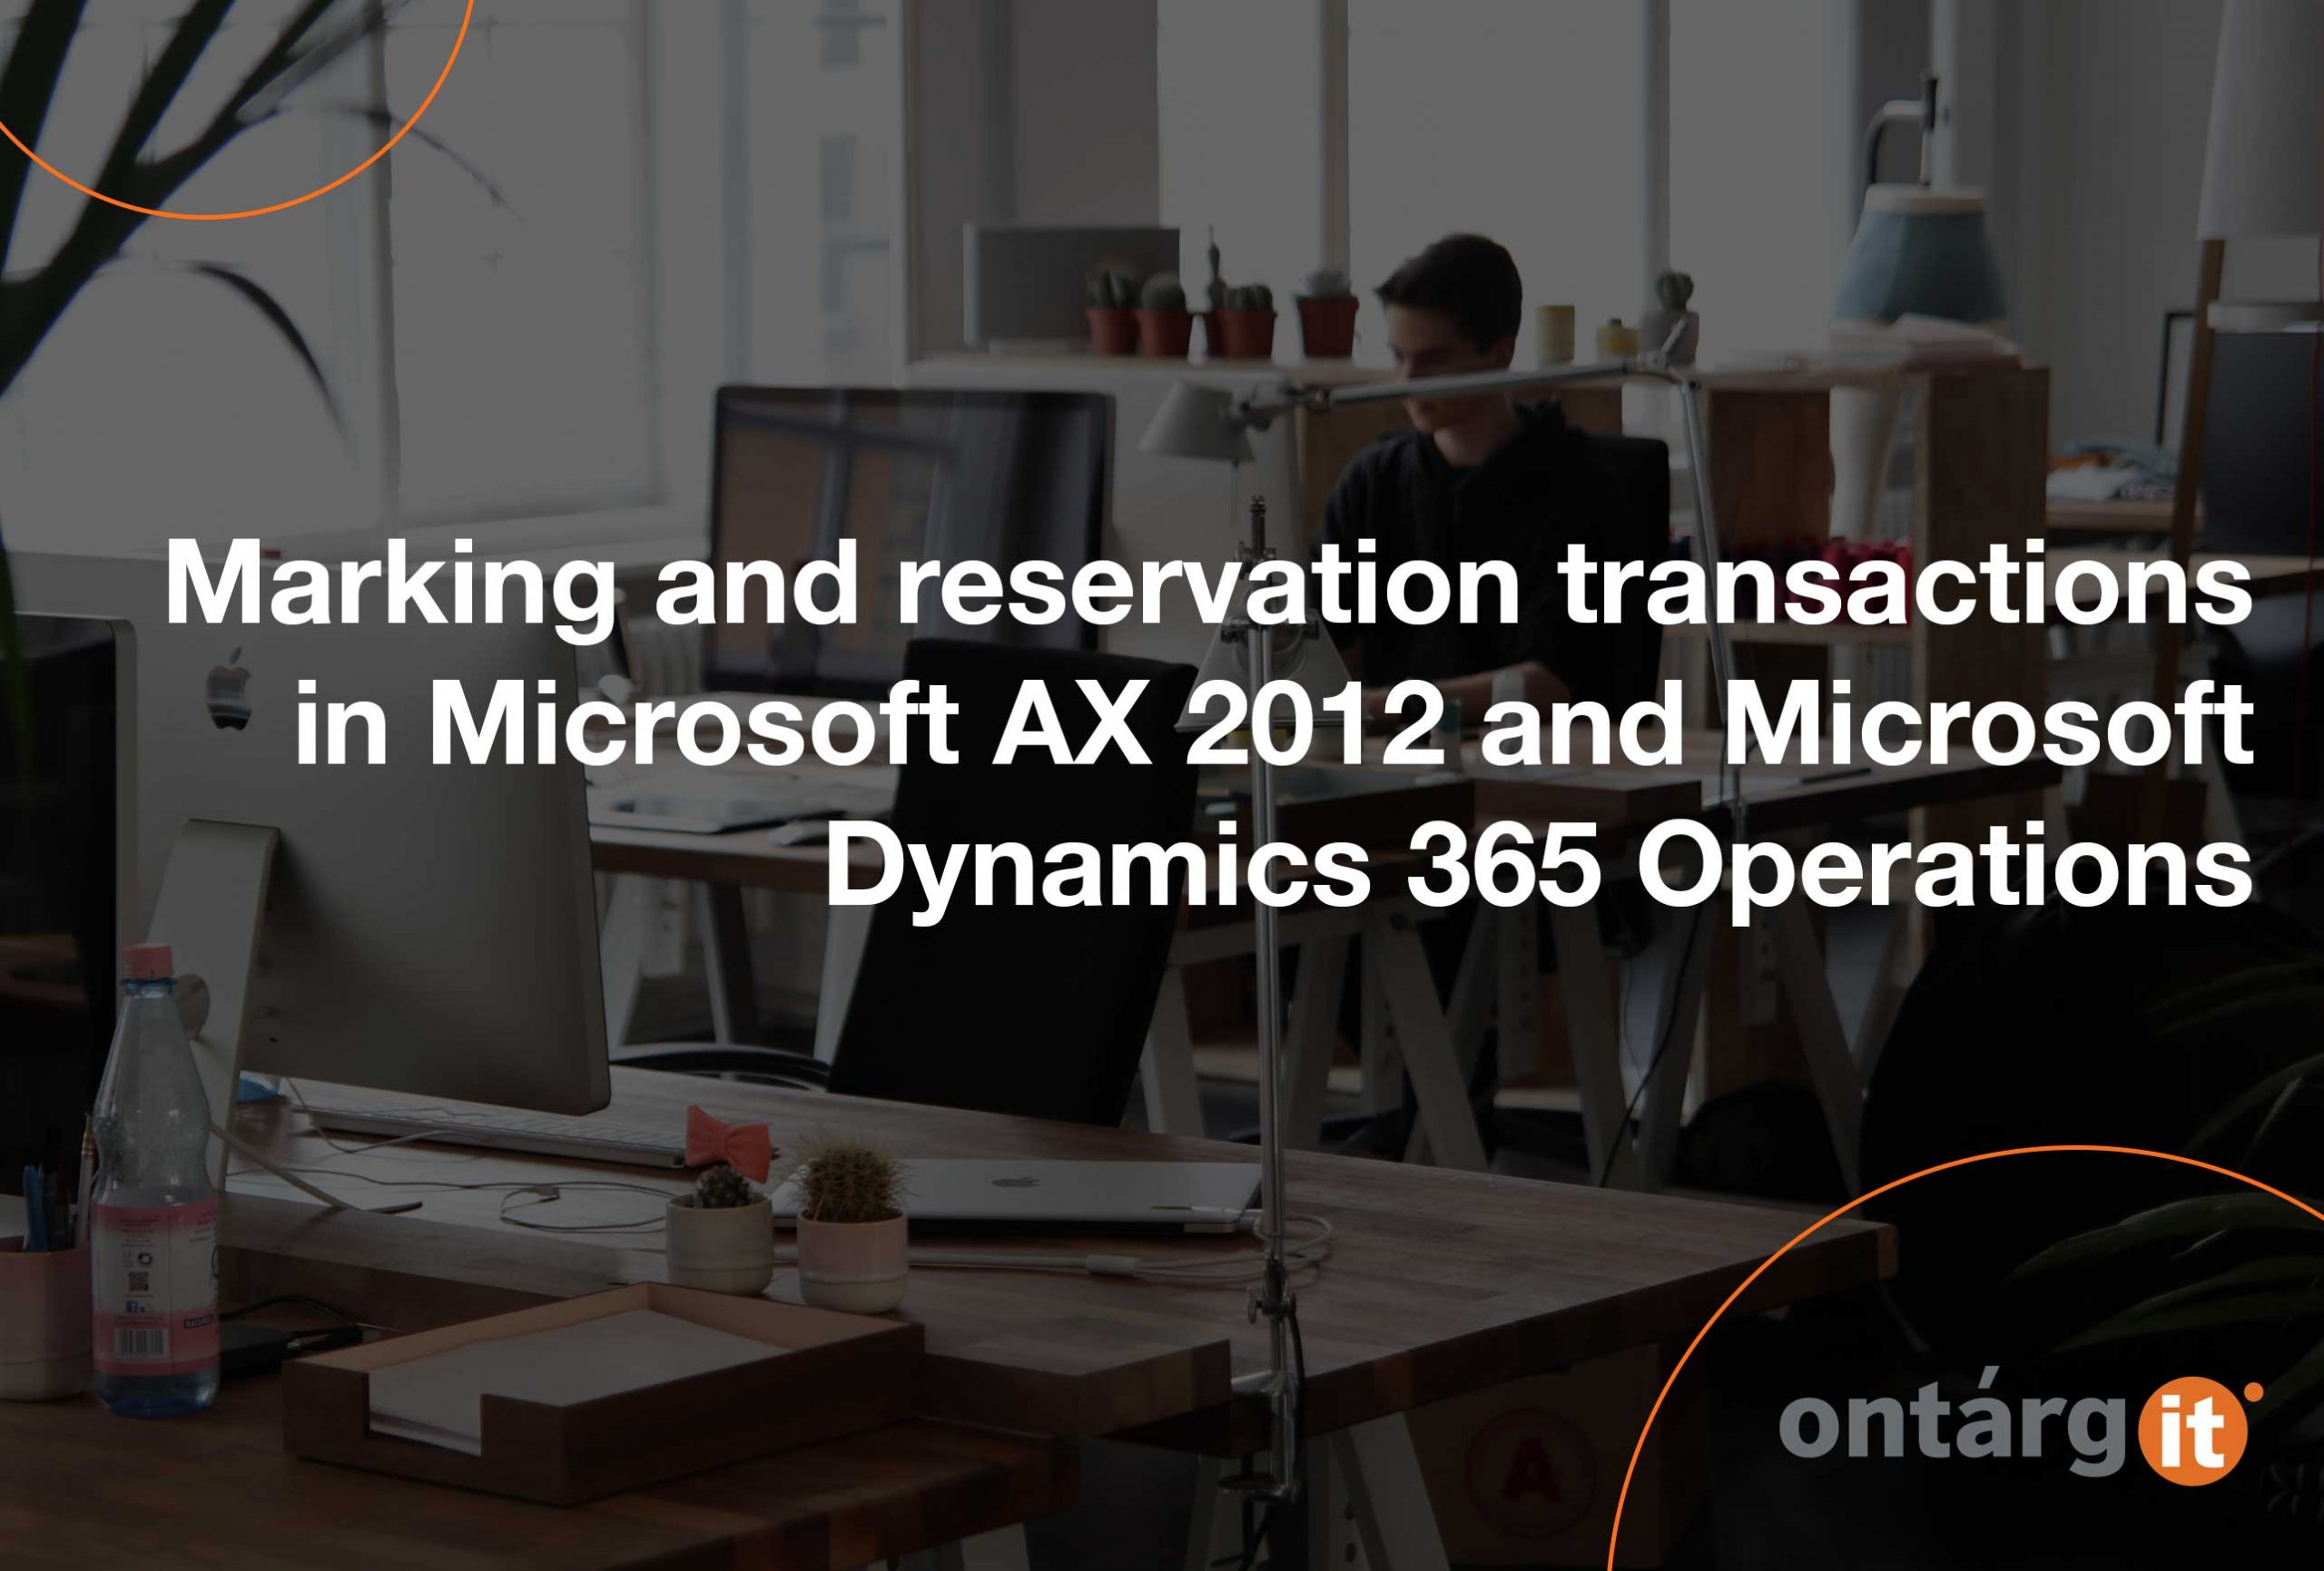 Marking-and-reservation-transactions-in-AX-2012-and-D365O